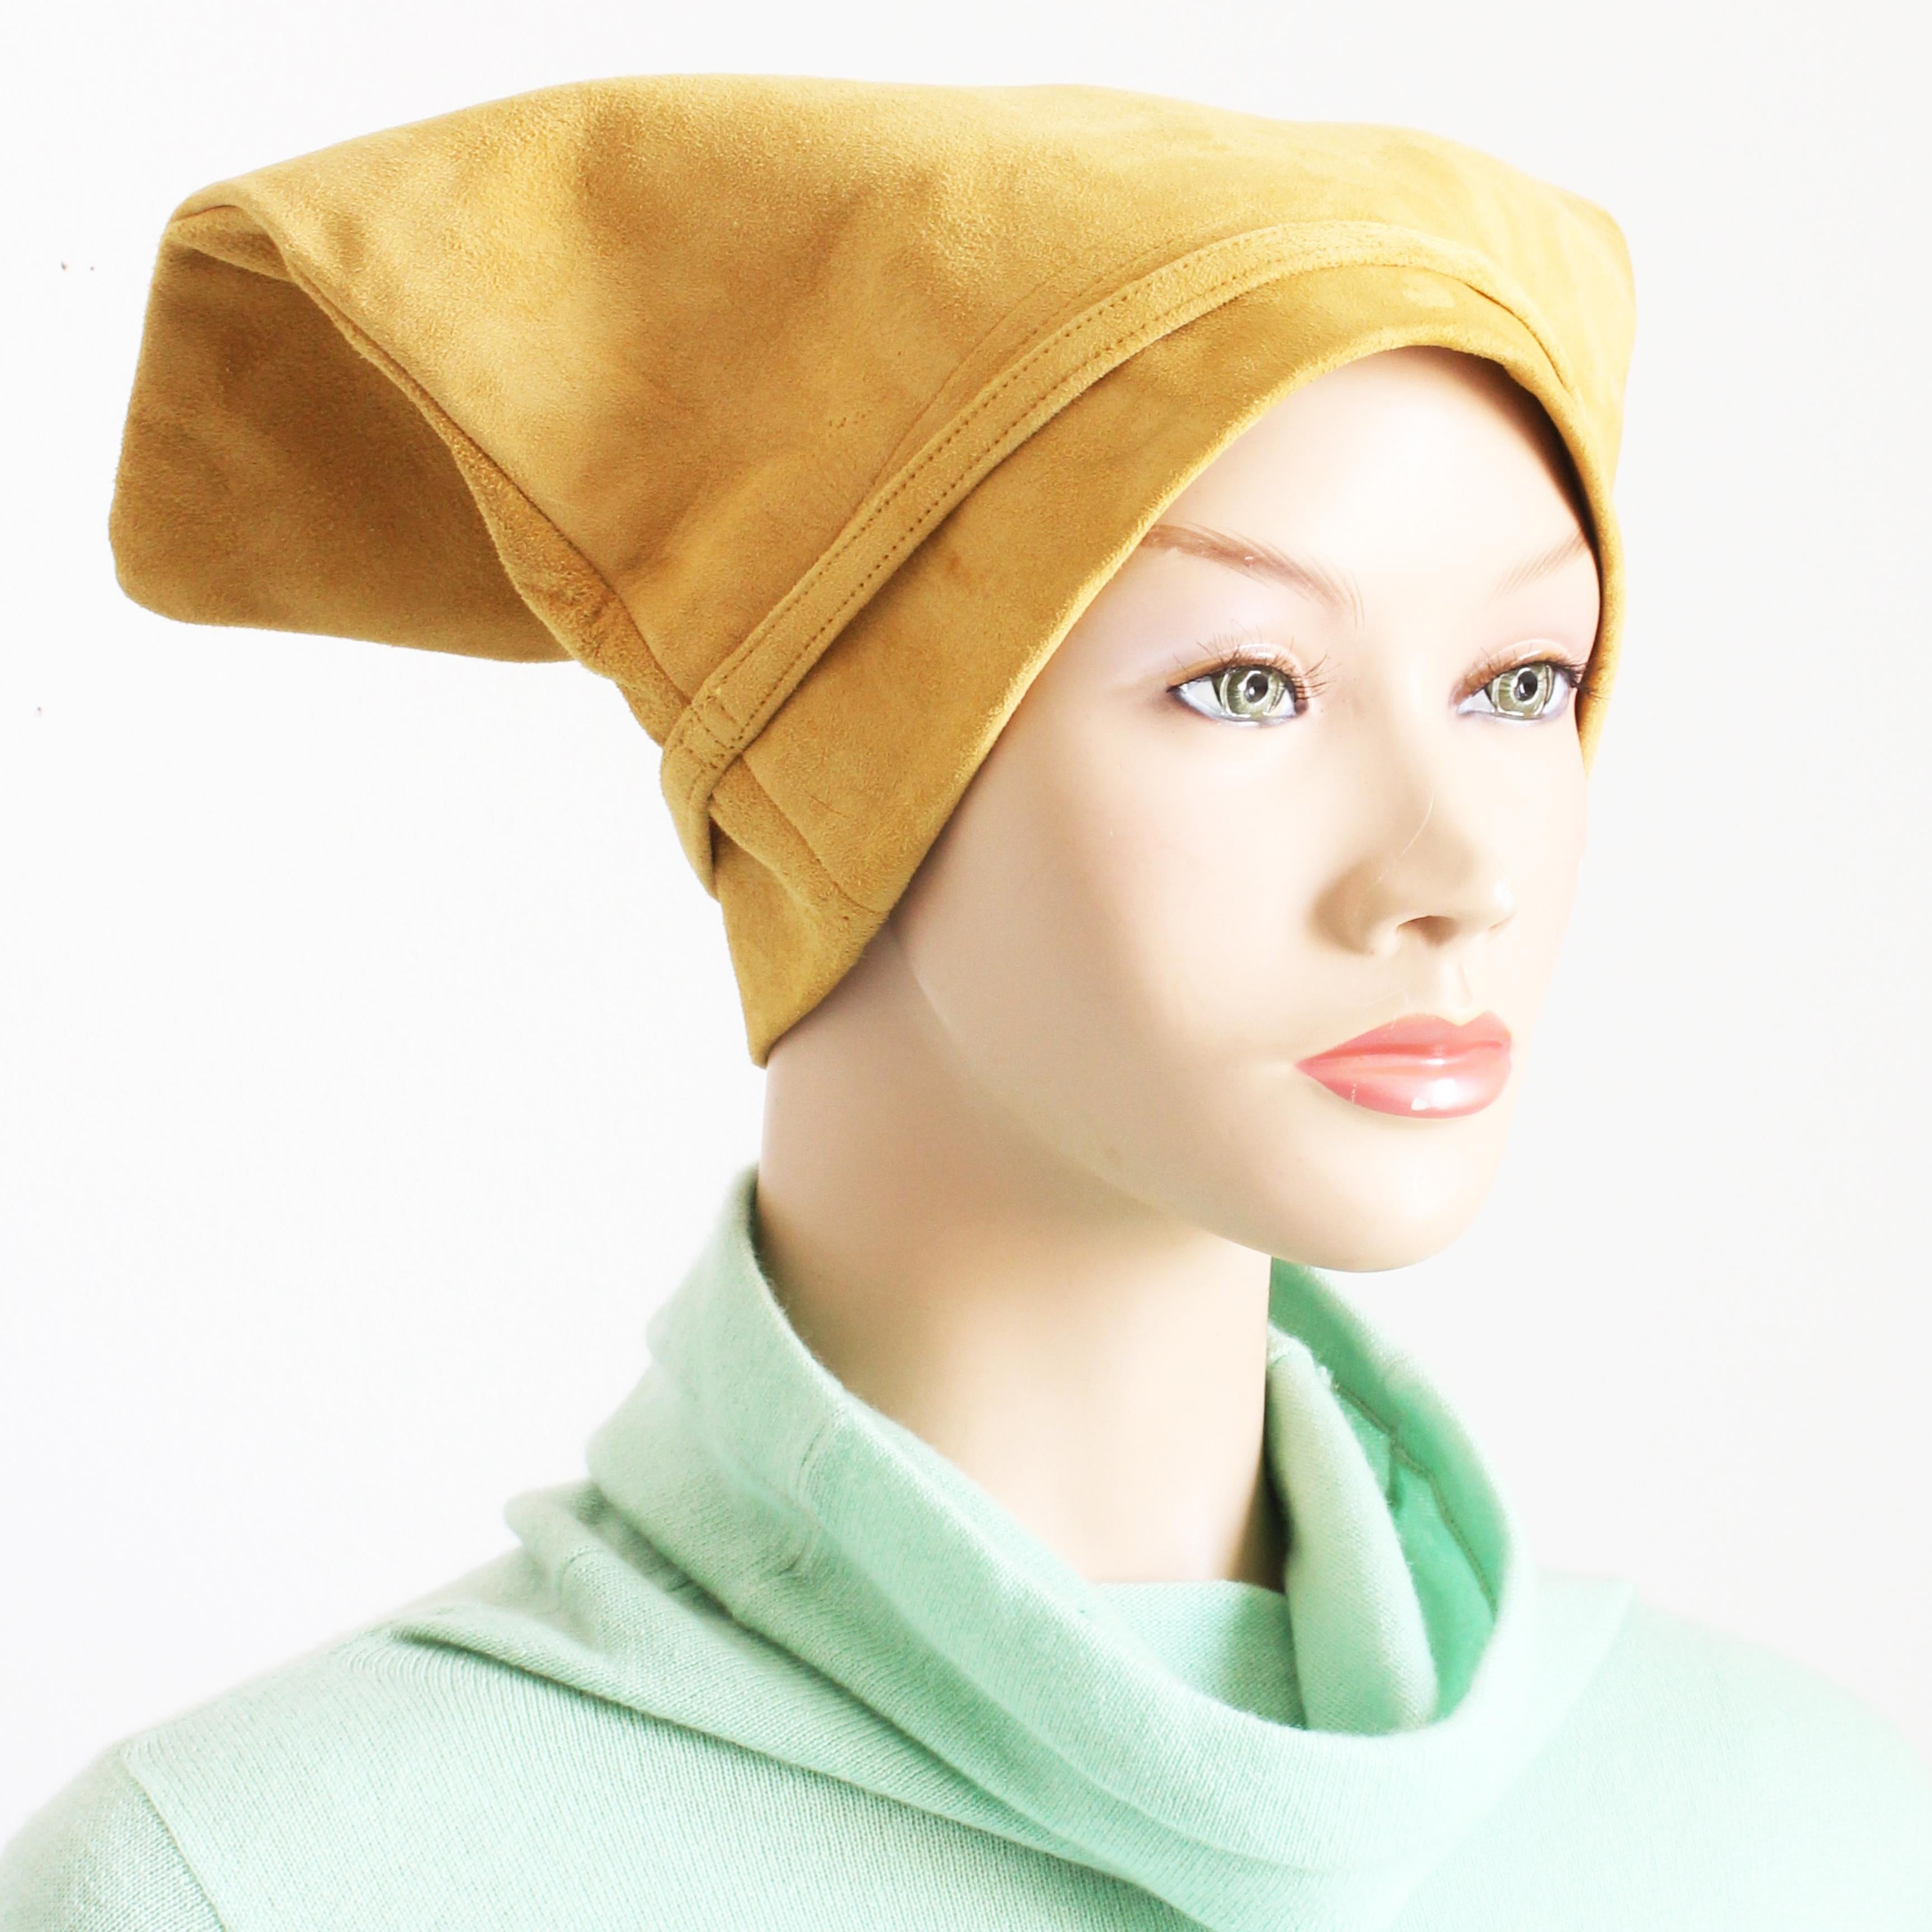 Preowned, vintage 'Bag hat', designed by Bonnie Cashin for Sills, most likely in the 1960s.  Made from supple suede leather in a rich butter-creme tan shade, it has skinny cinch straps at the sides and is lined in soft leather.

Bonnie Cashin's work